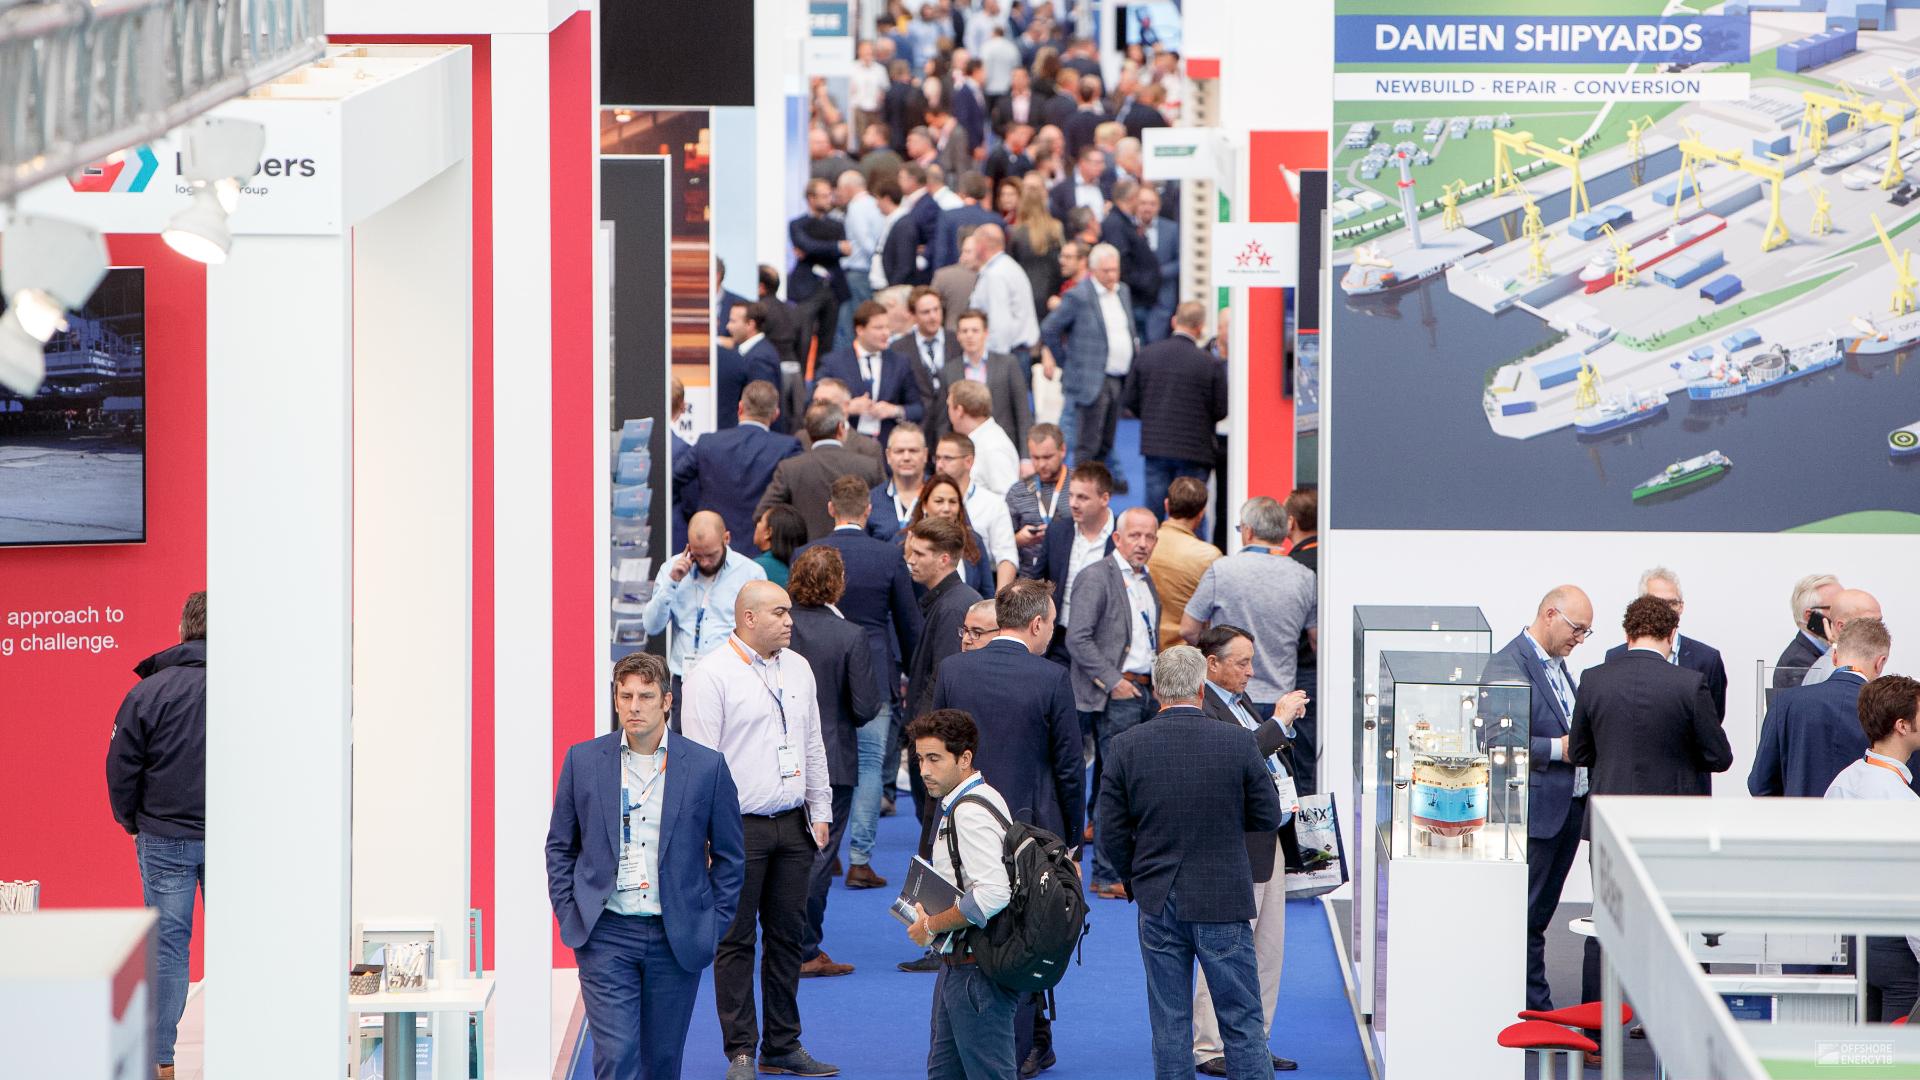 Giving a Push to Energy Transition at Offshore Energy 2019